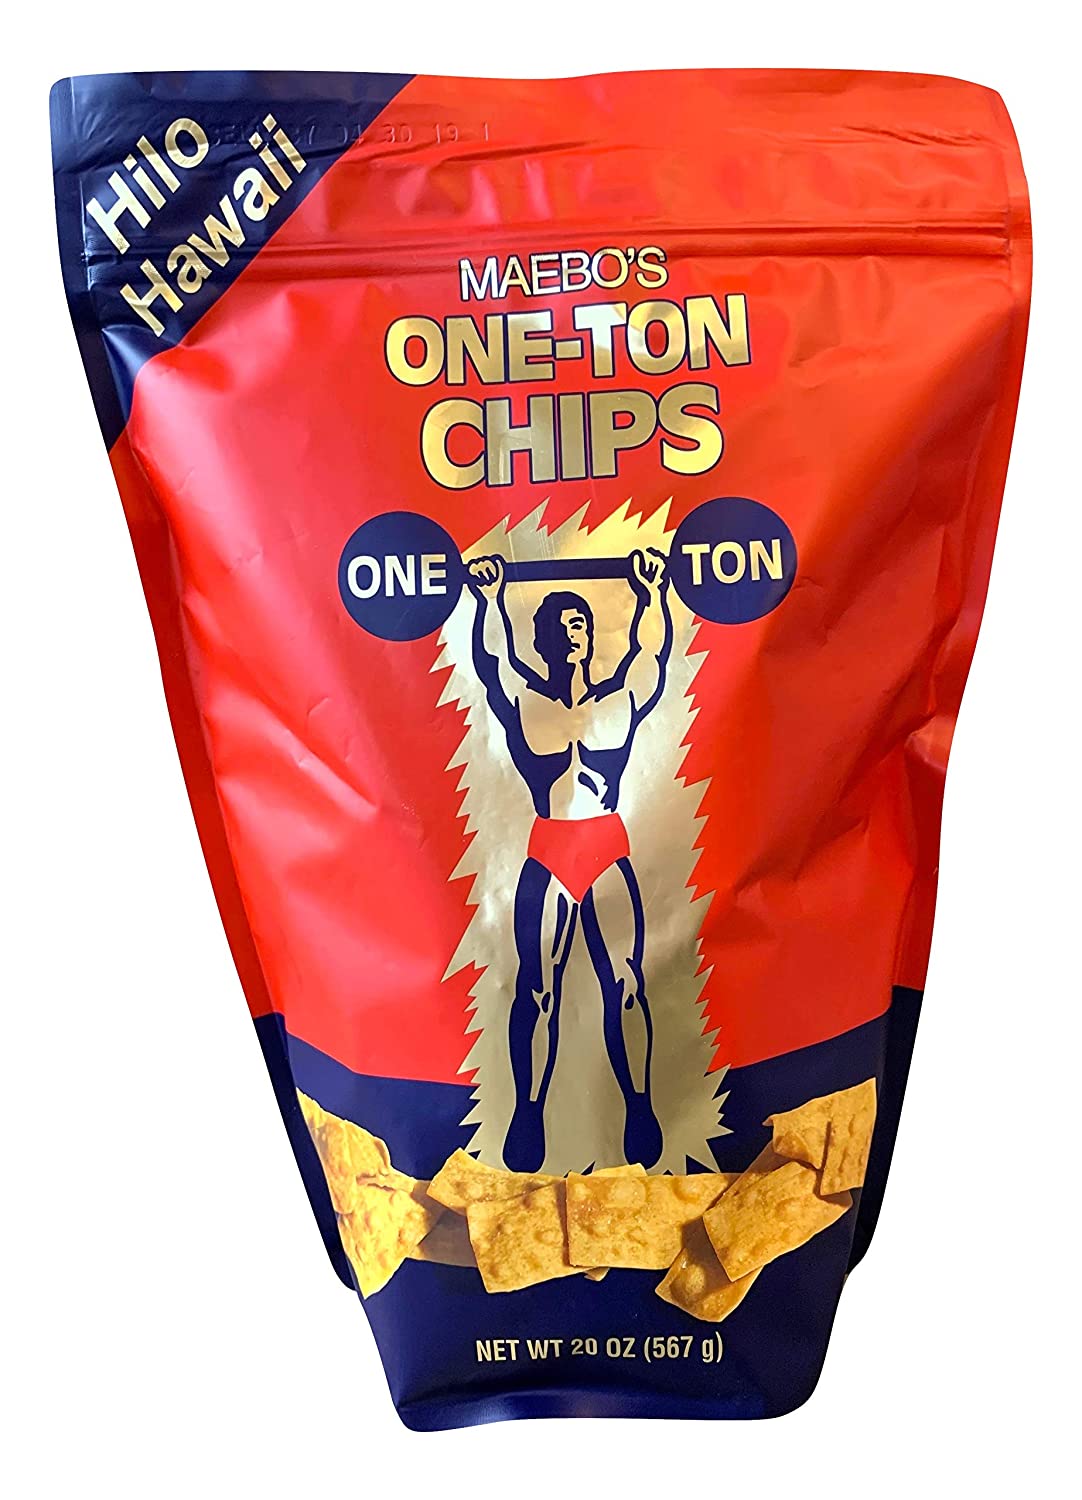 ONE-TON Chips, Large bag - 20 ounce (567g)